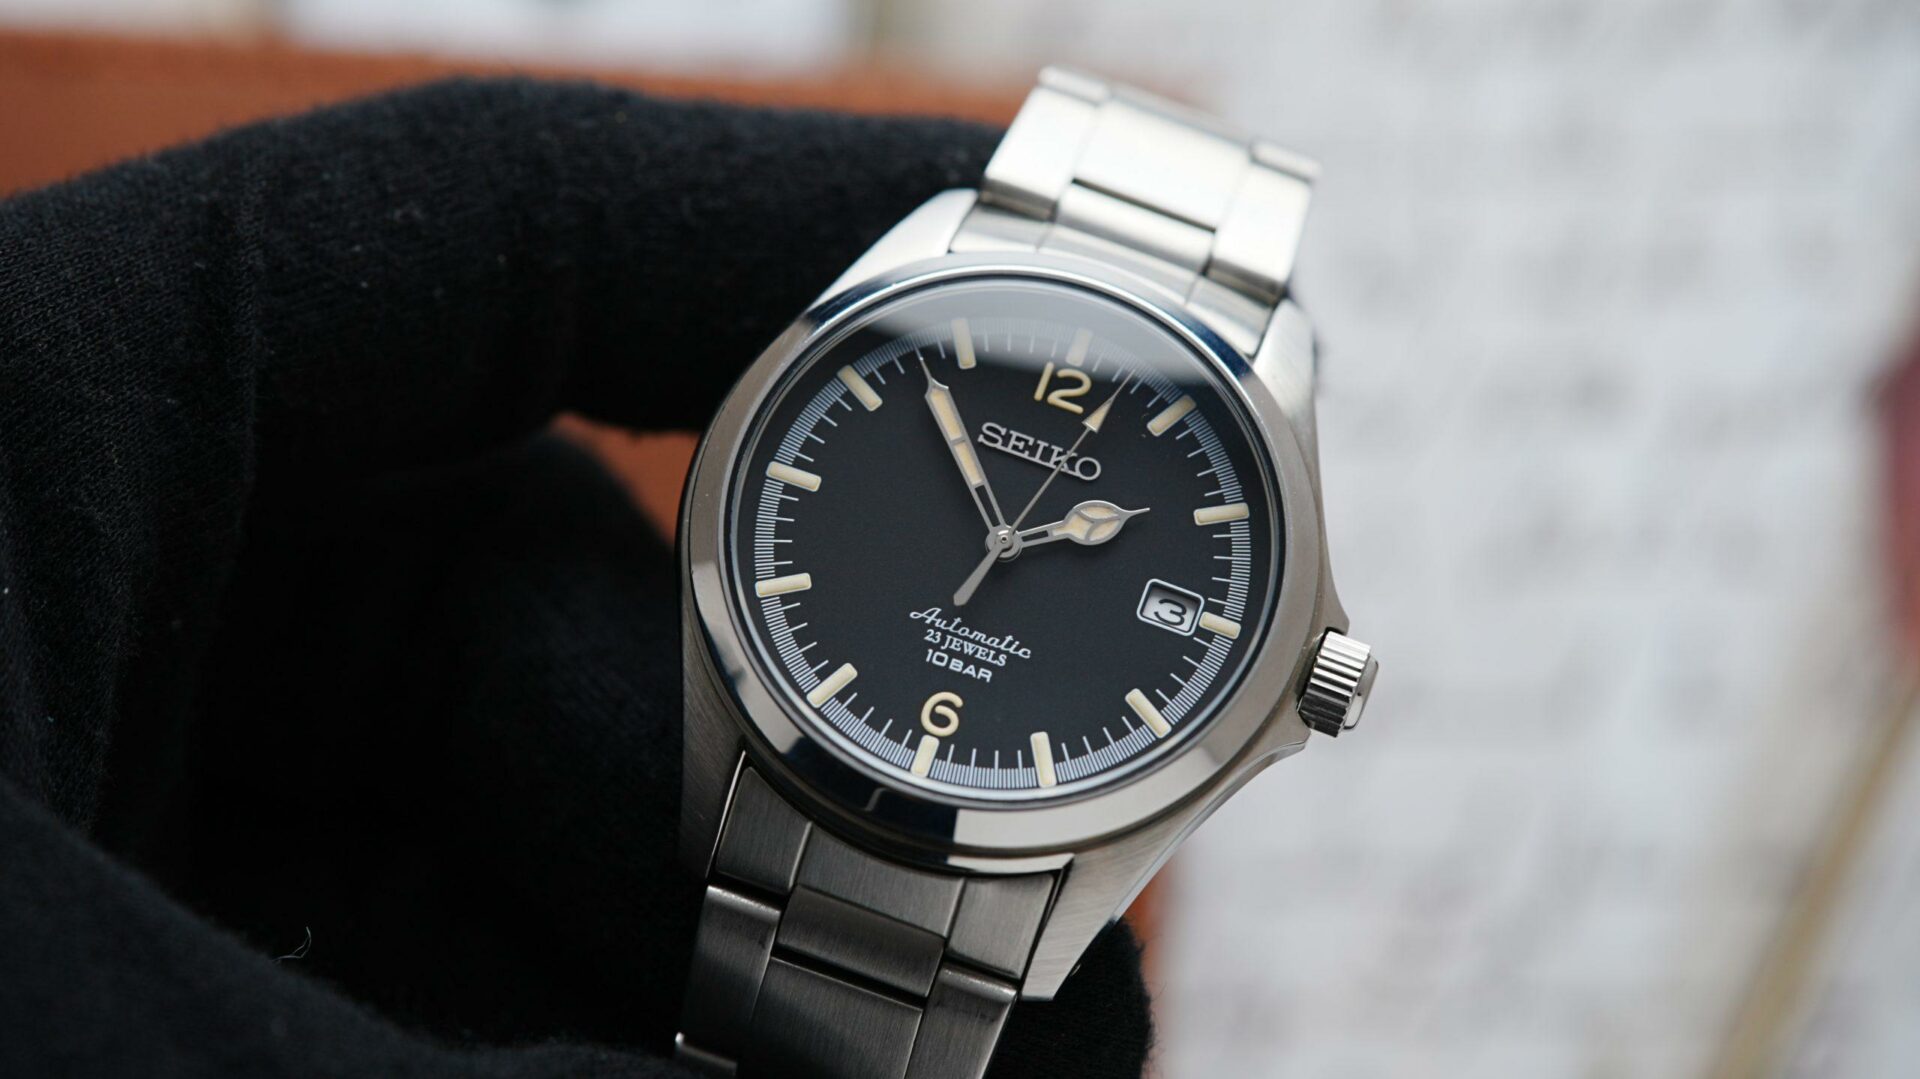 Seiko Explorer 1016 Limited Edition being held with black glove.